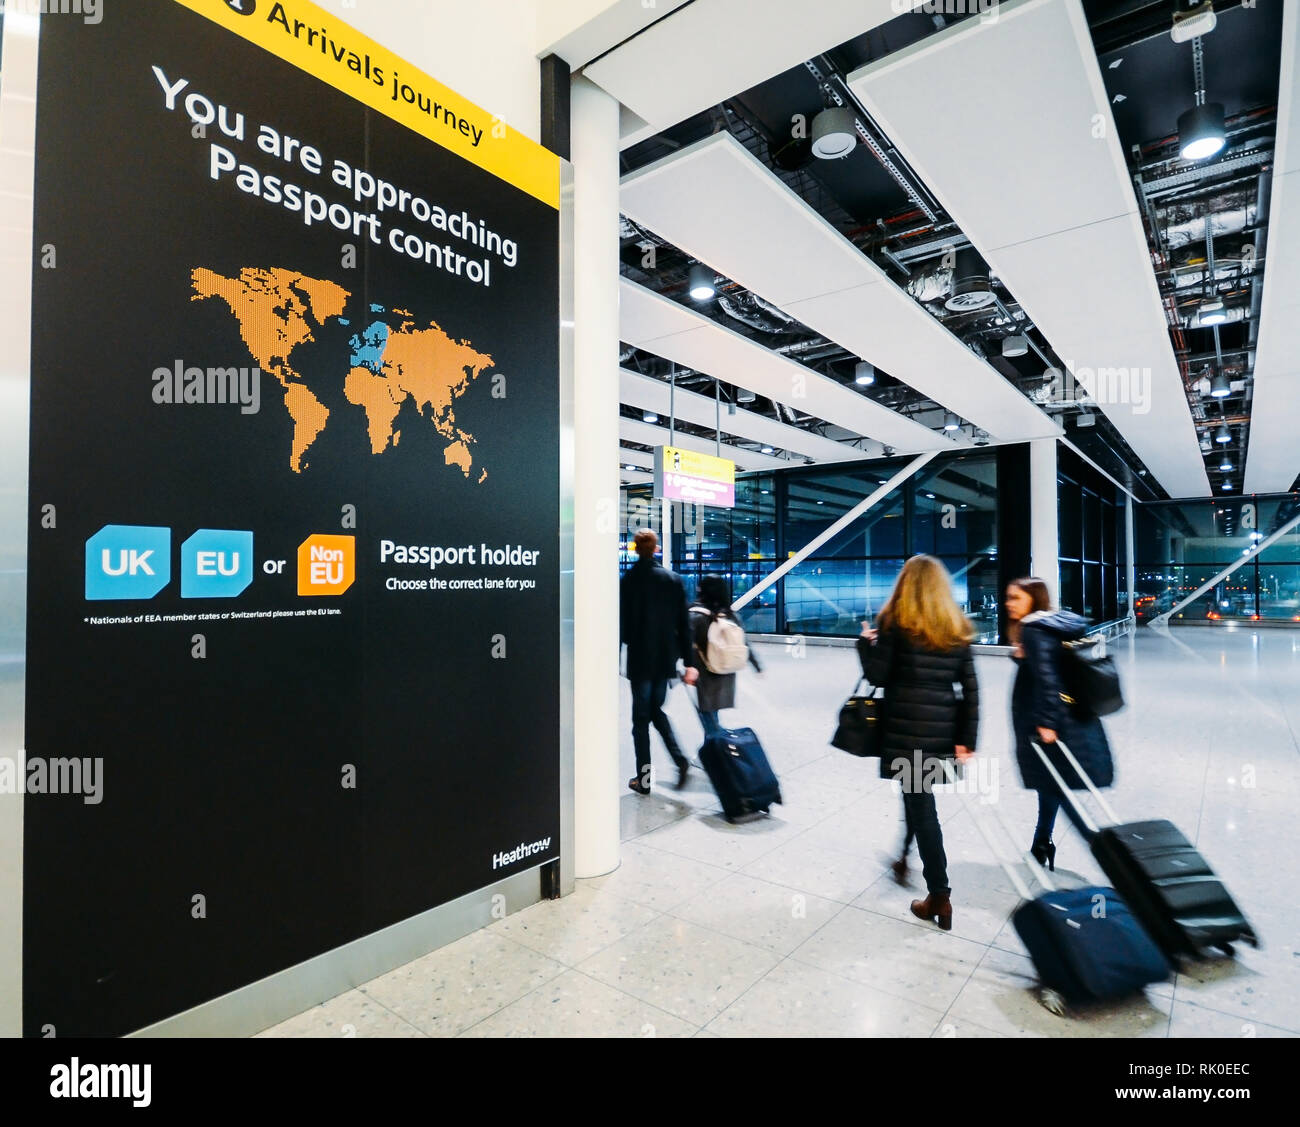 London Heathrow, UK, Feb 5, 2019: Passenger walks past sign prior to immigration passport control pointing towards queues for UK, EU and Non-EU Stock Photo